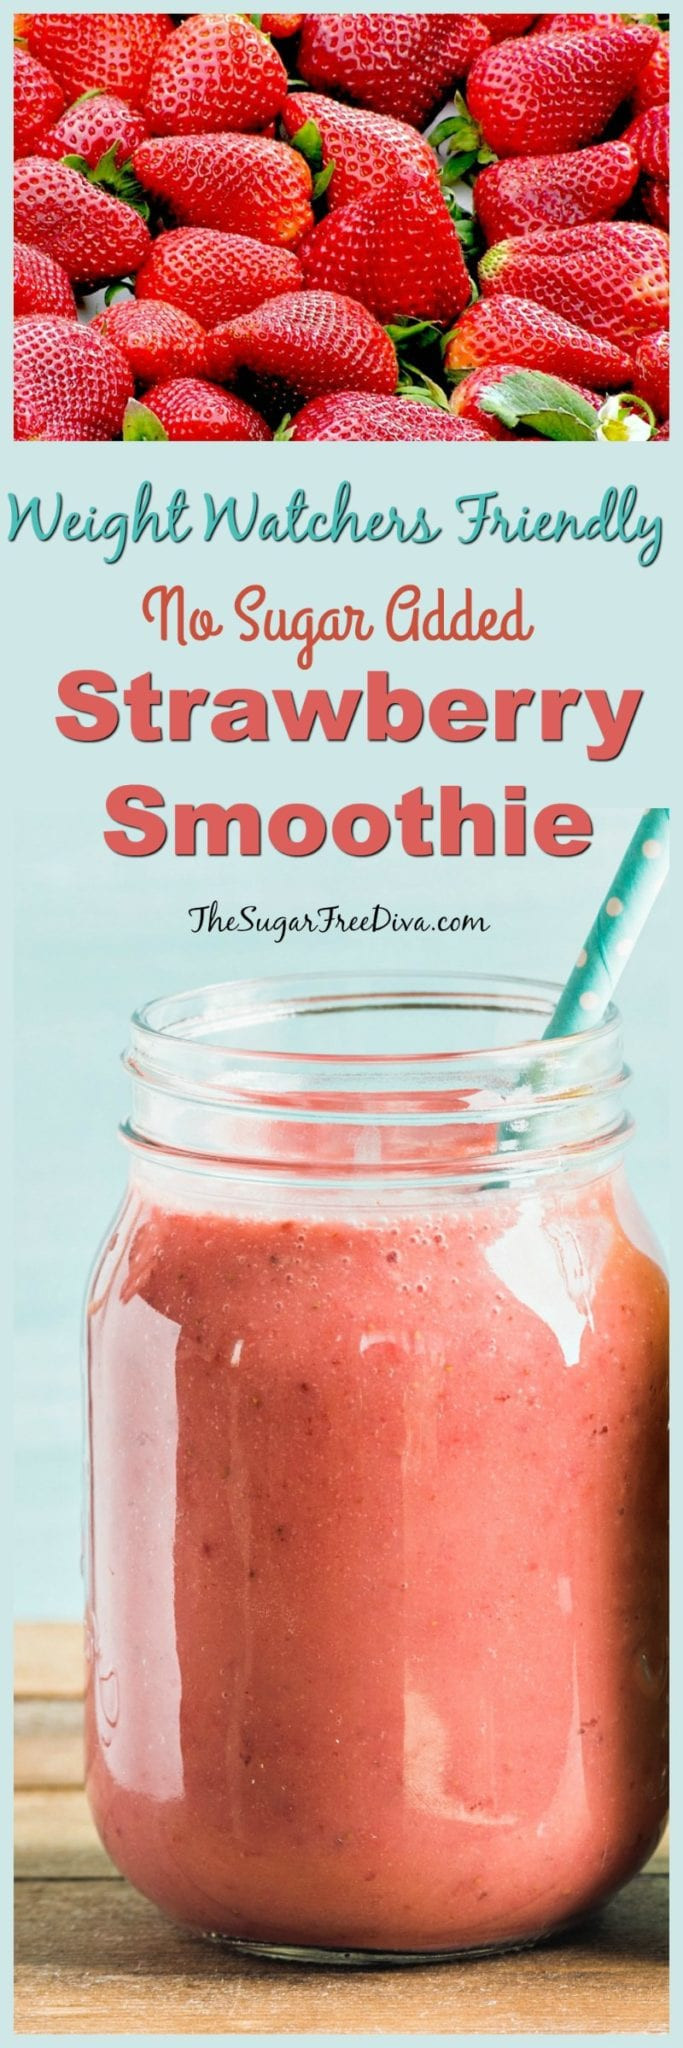 Weight Watchers Smoothies Mix Recipes
 How to make a Weight Watchers Friendly Strawberry Smoothie